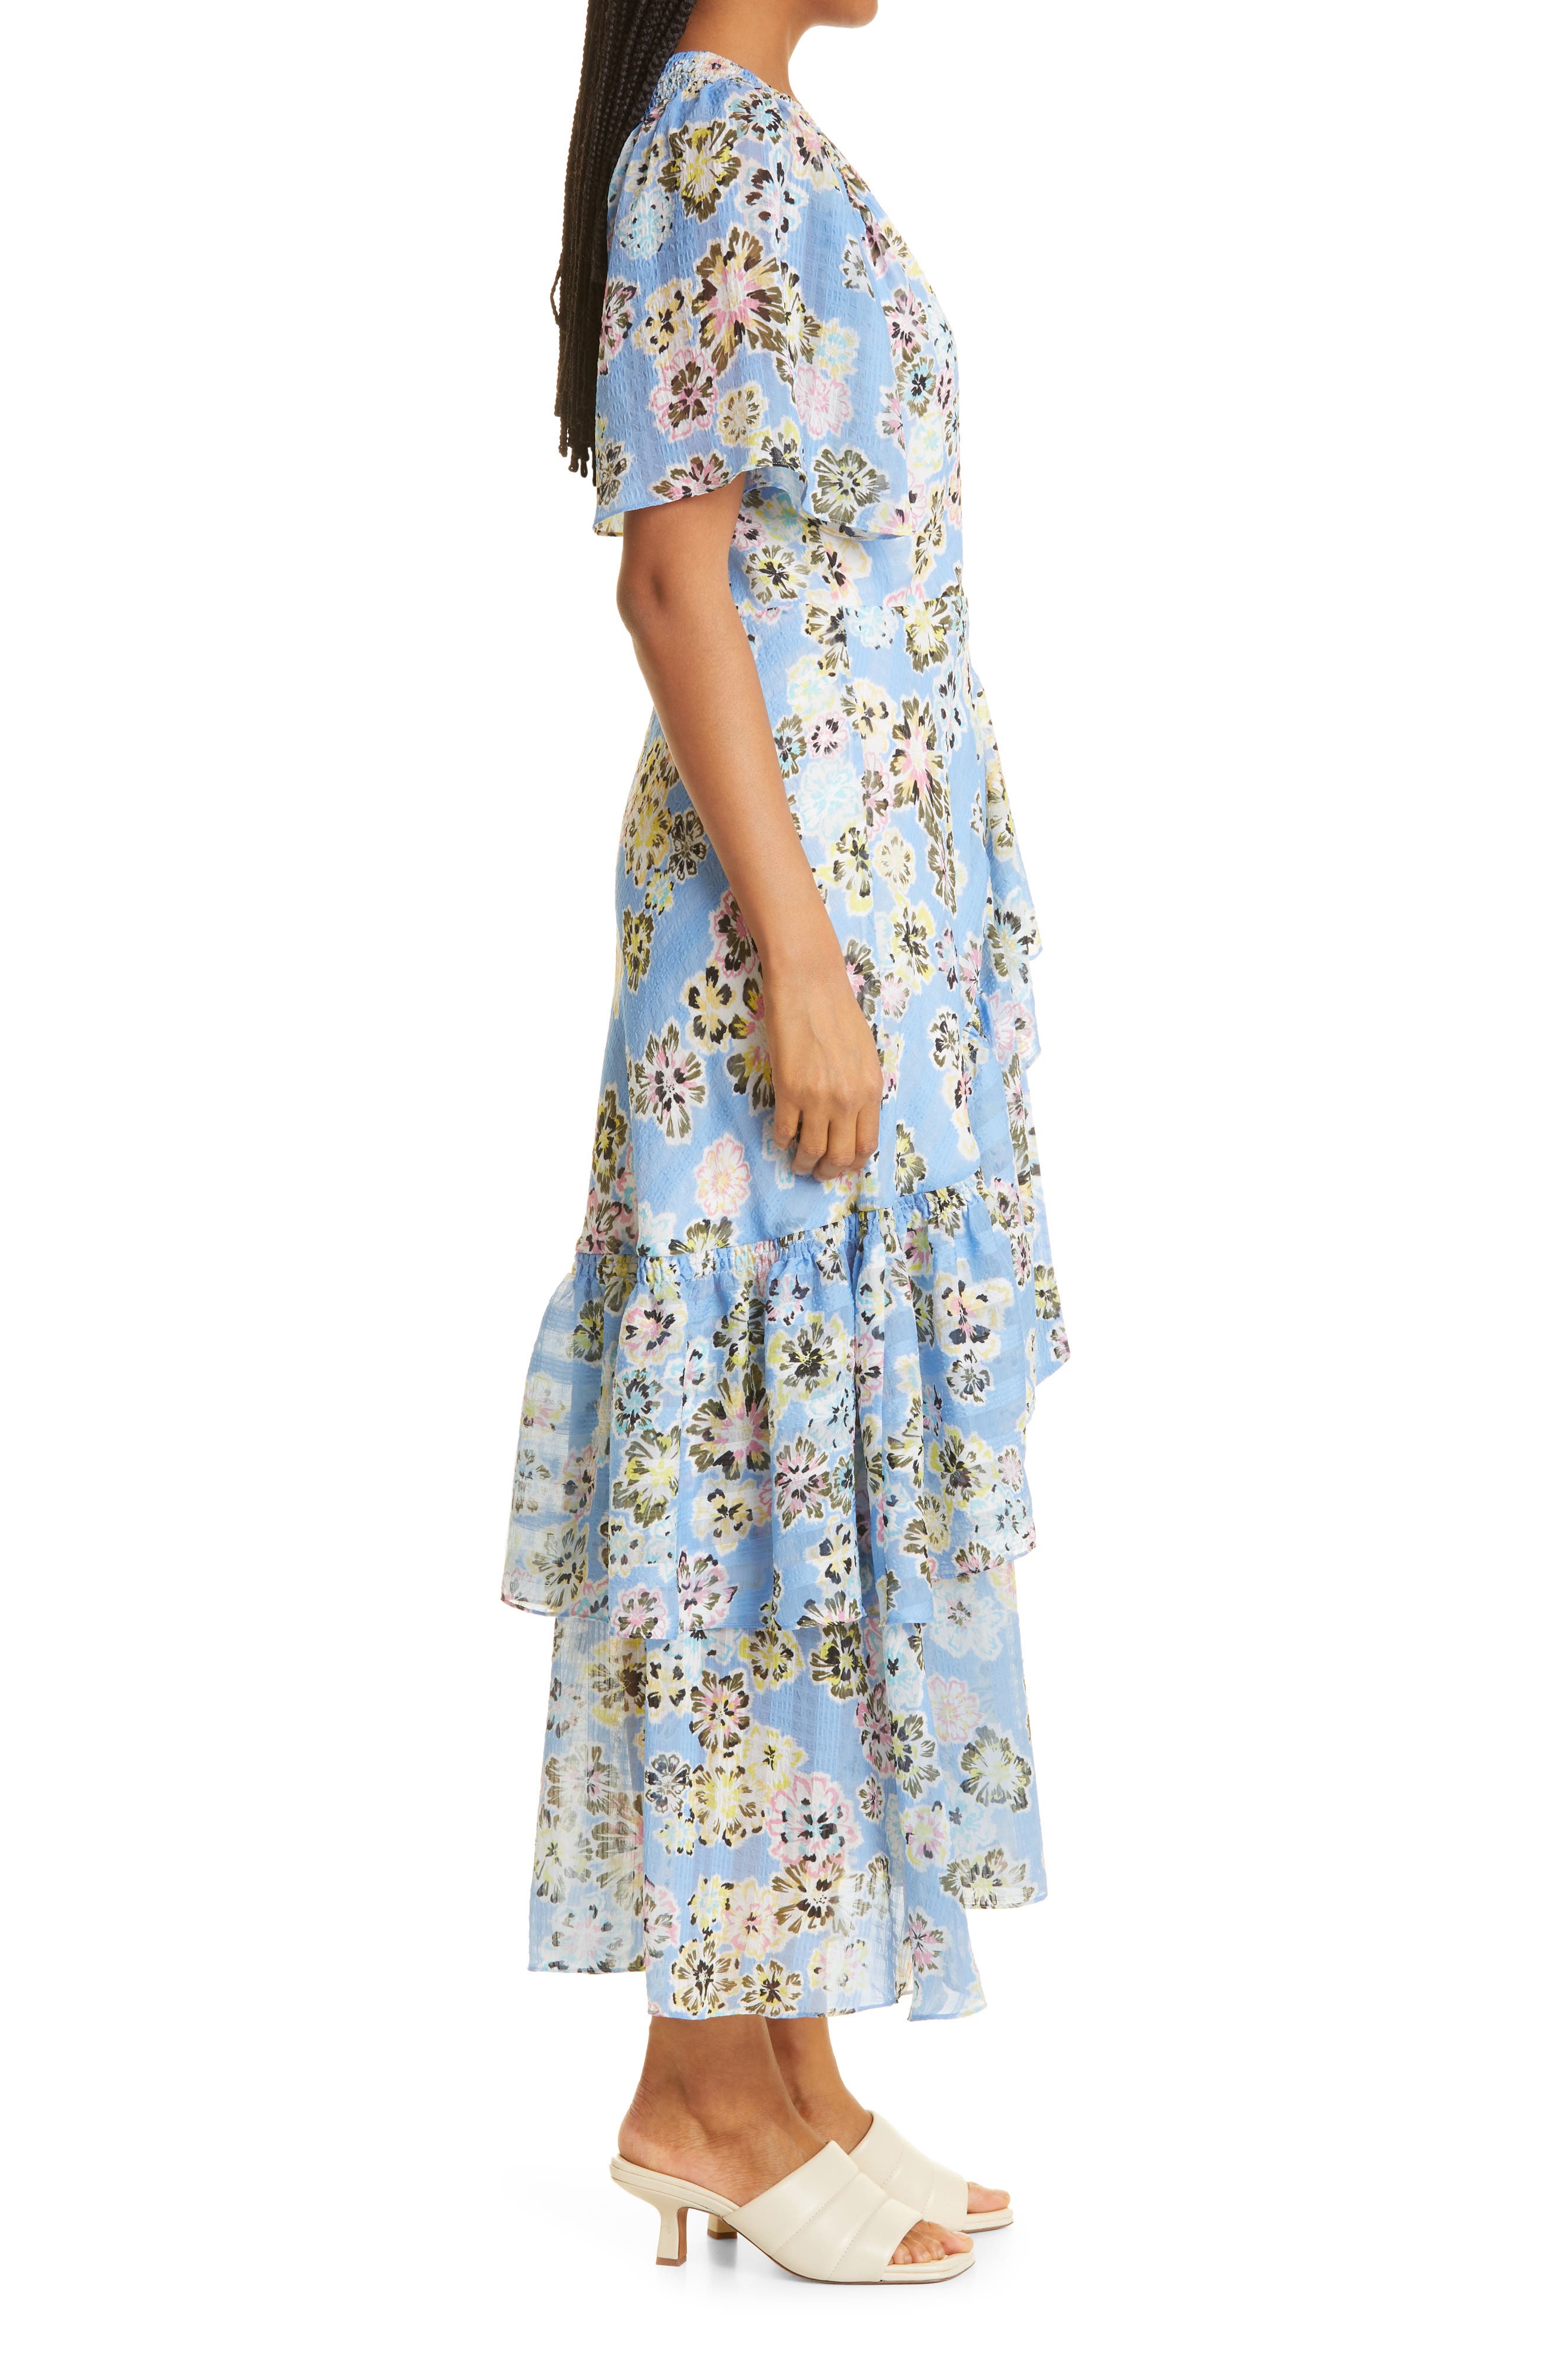 Tanya Taylor Brittany Floral Wrap Dress ...